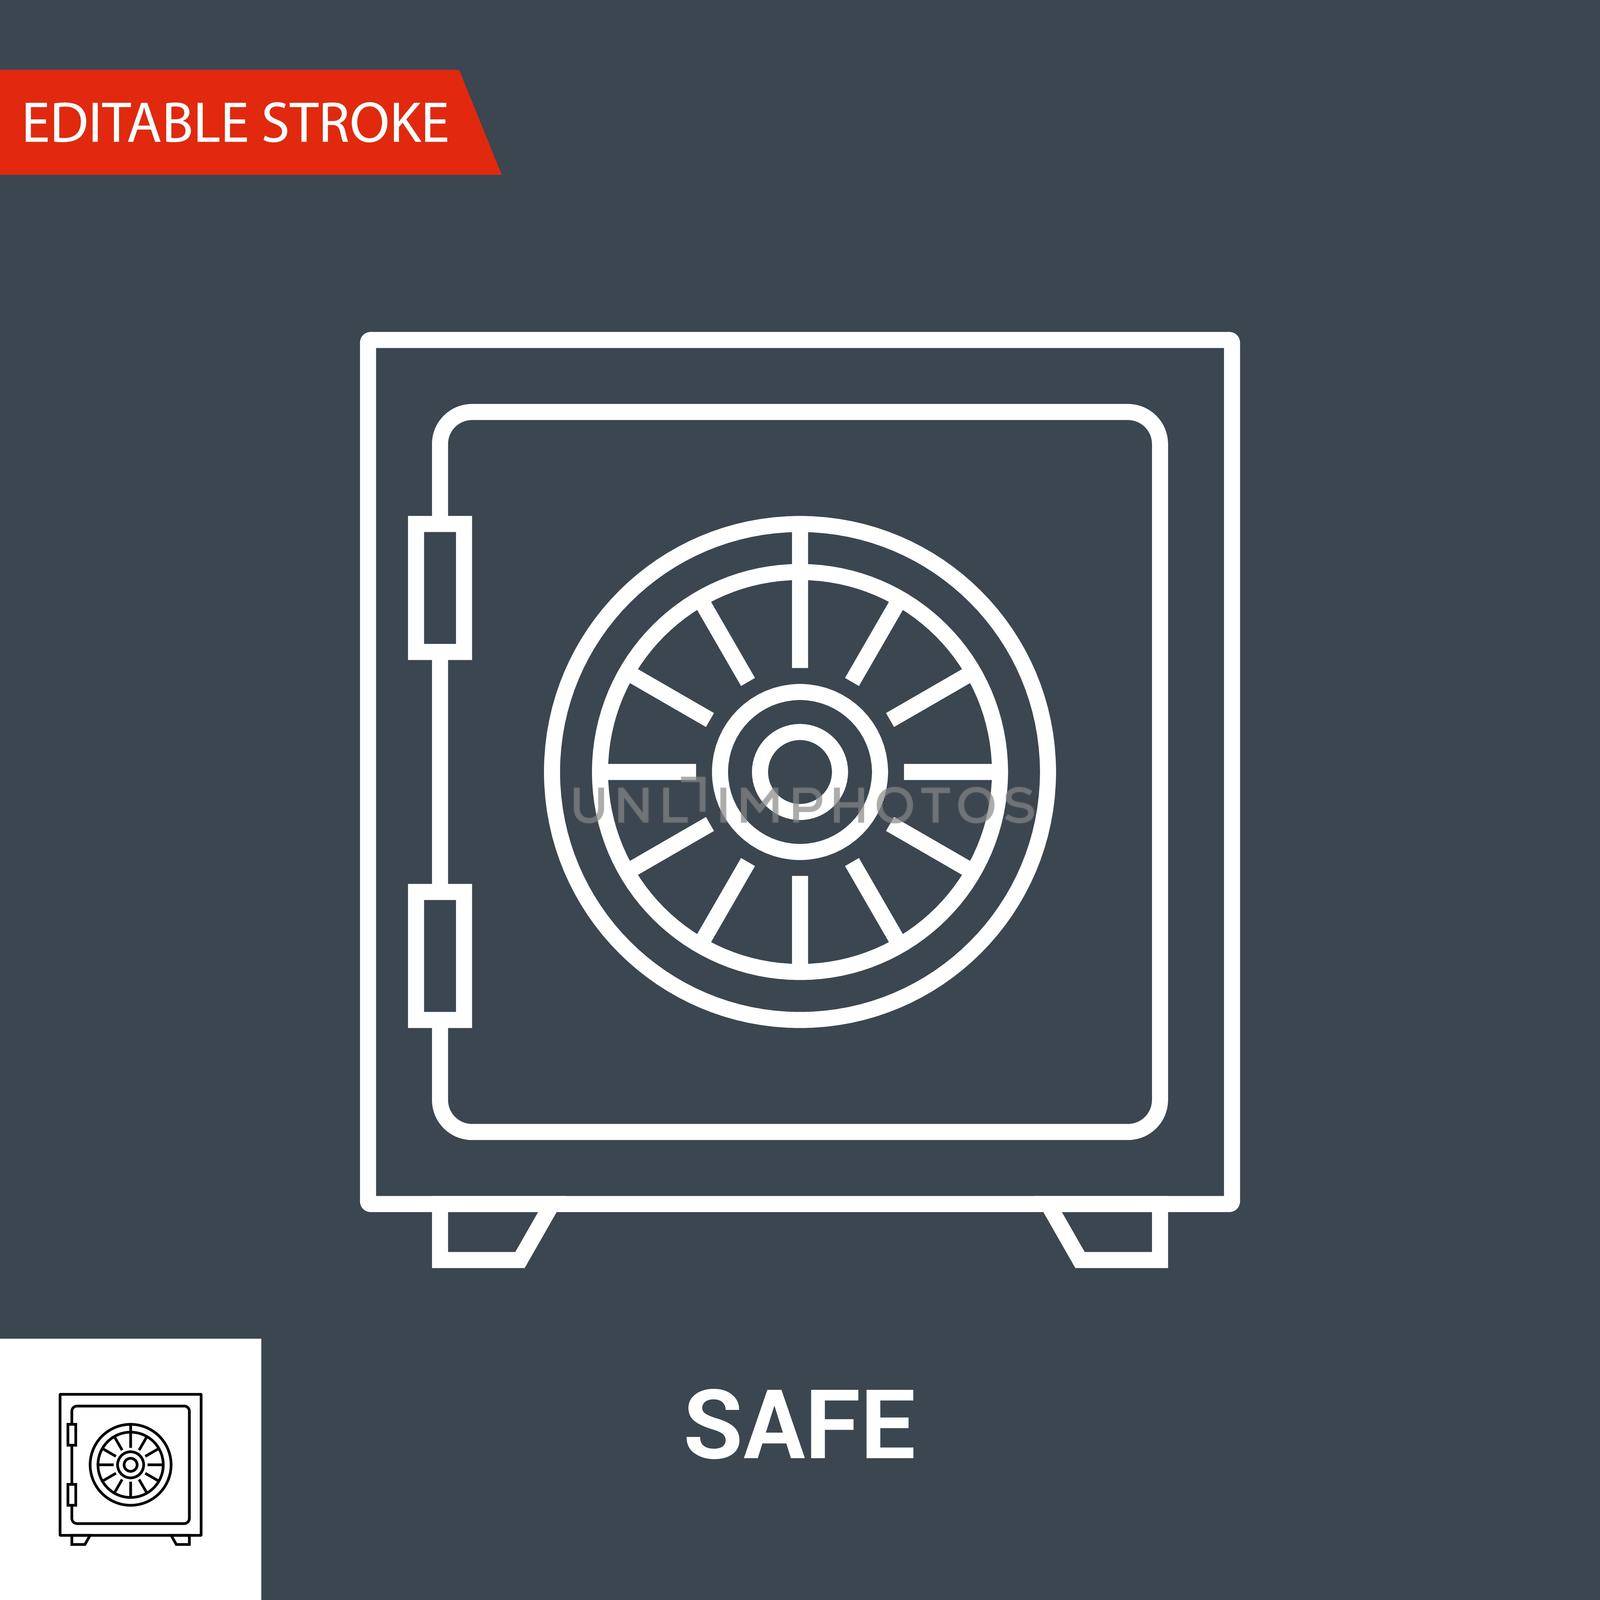 Safe Icon. Thin Line Vector Illustration - Adjust stroke weight - Expand to any Size - Easy Change Colour - Editable Stroke